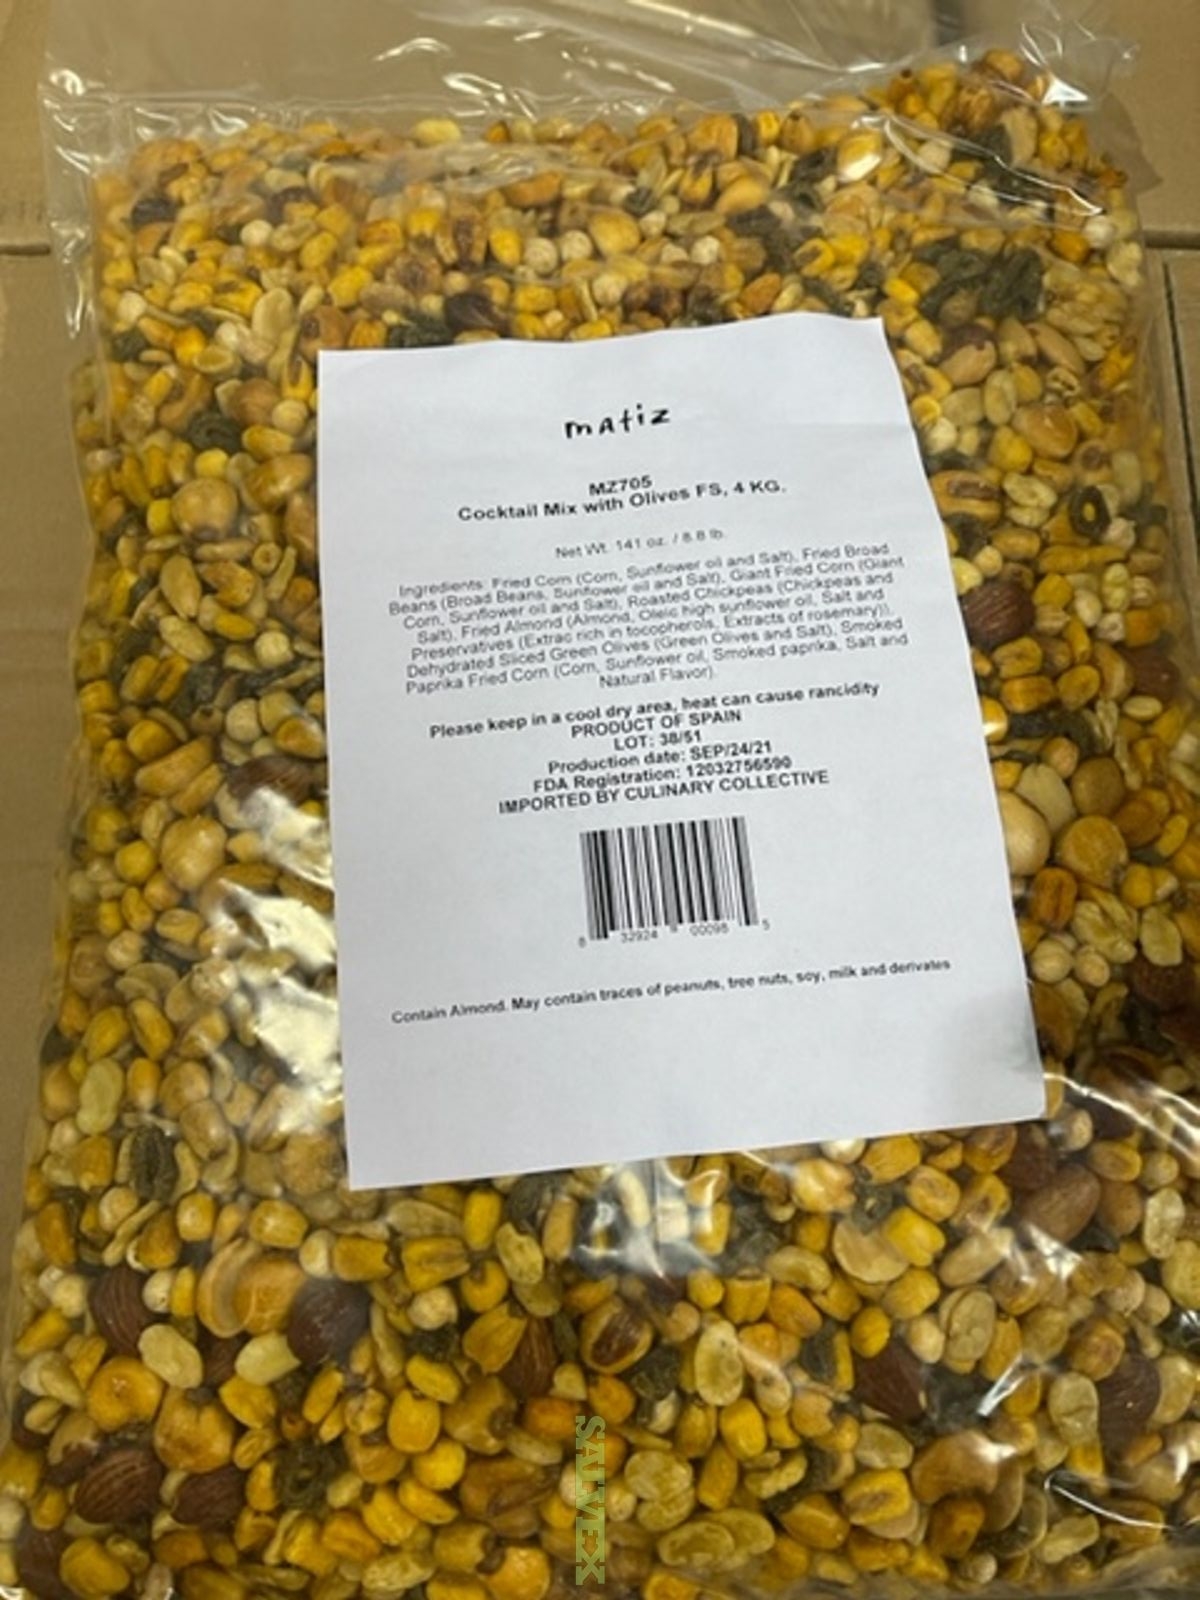 Cocktail Mix - Almonds, Fava Beans, Toasted Corn, Giant Toasted Corn, Chickpeas. (1 pallet - 1400 lbs)